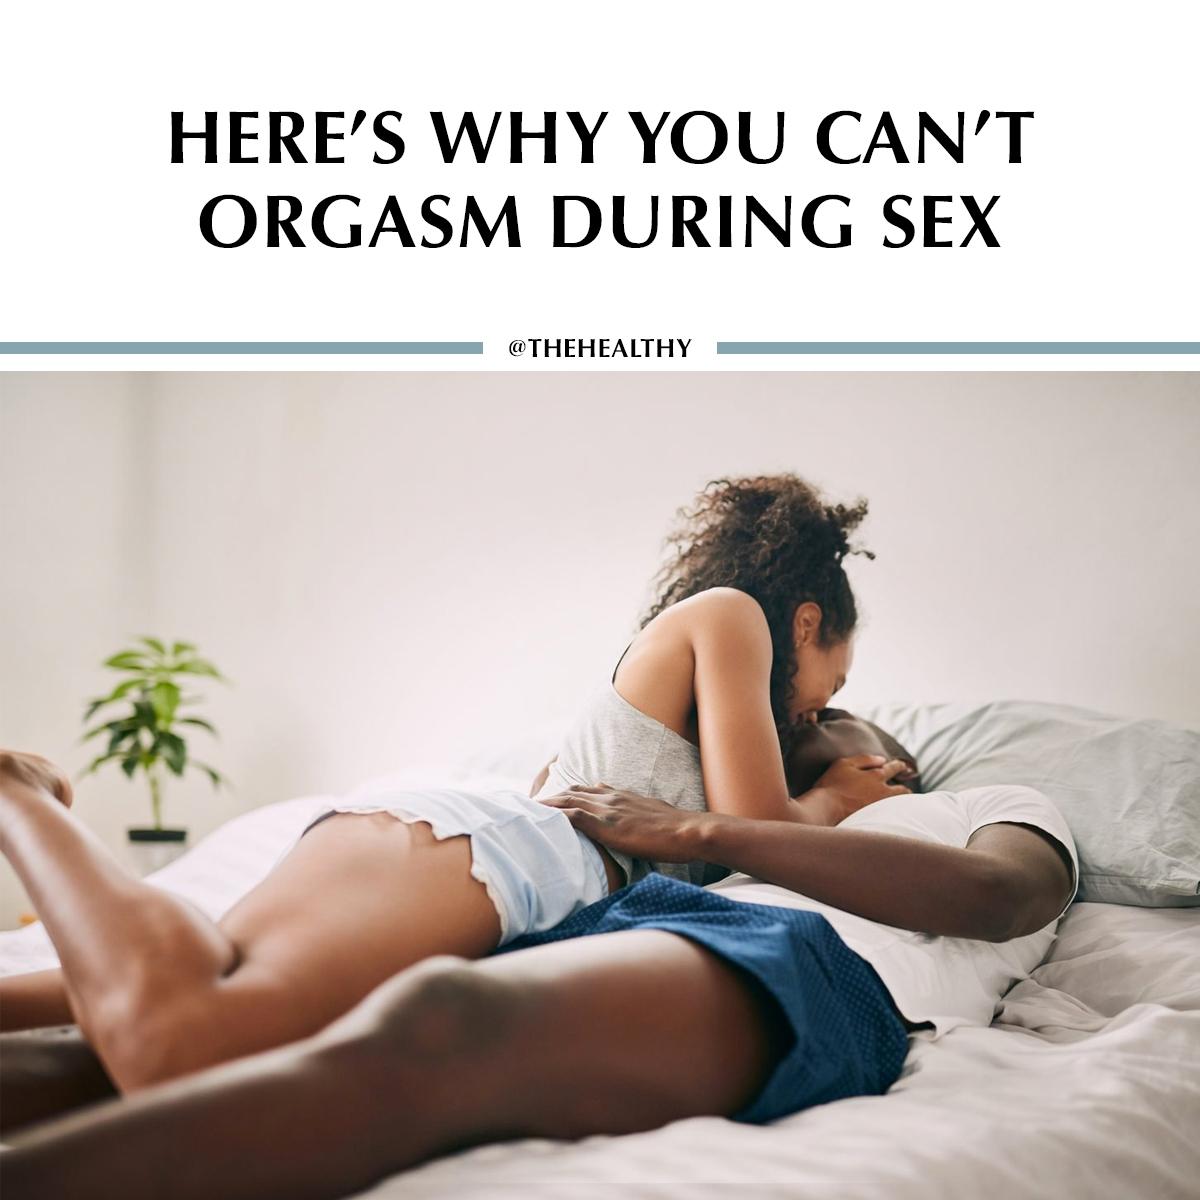 Are you able to orgasm on your own, but not during intercourse? You're not alone. Click the link to learn what Cheryl Fraser, a sex and relationships therapist, says to do. trib.al/dJZMnU6